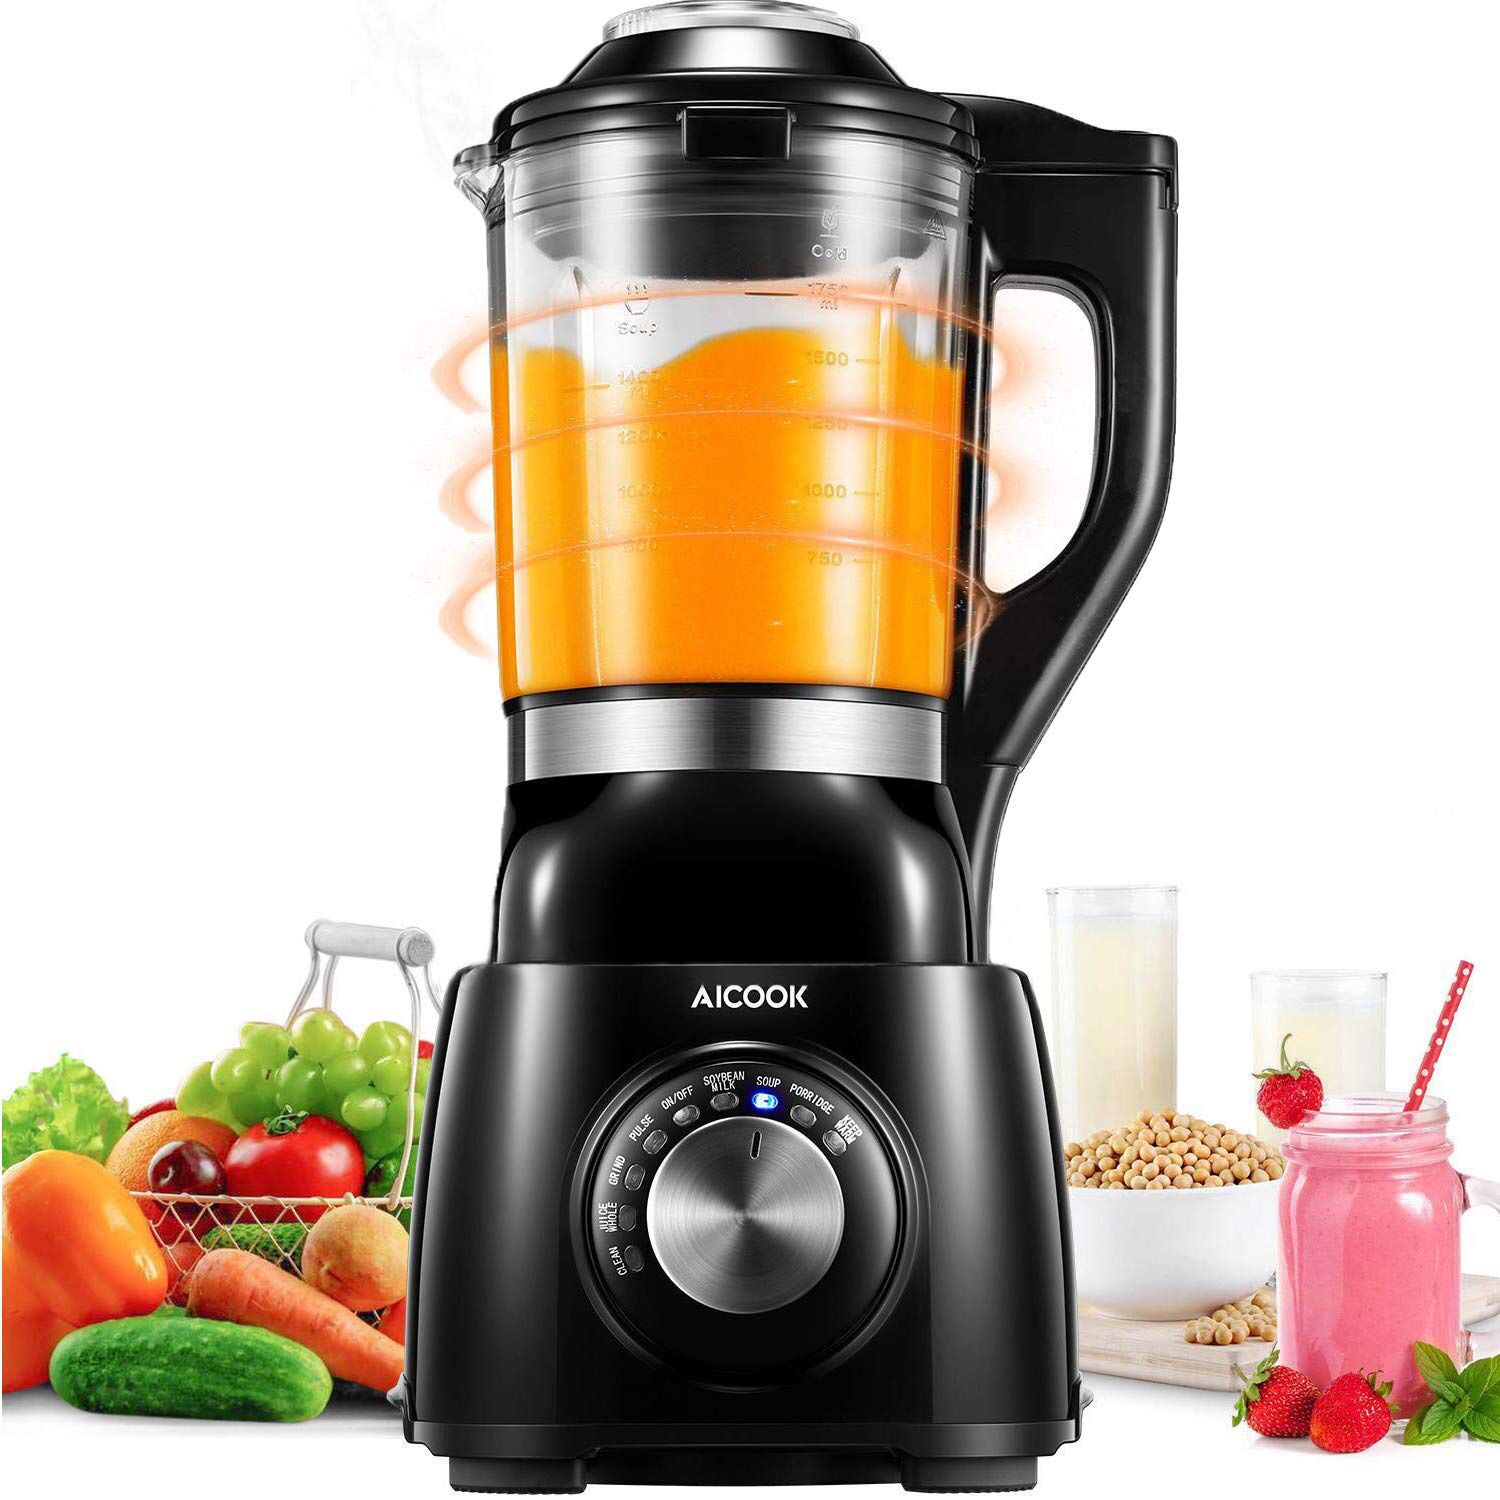 New in Box Aicook Professional Countertop Heating and Multi Use Blender